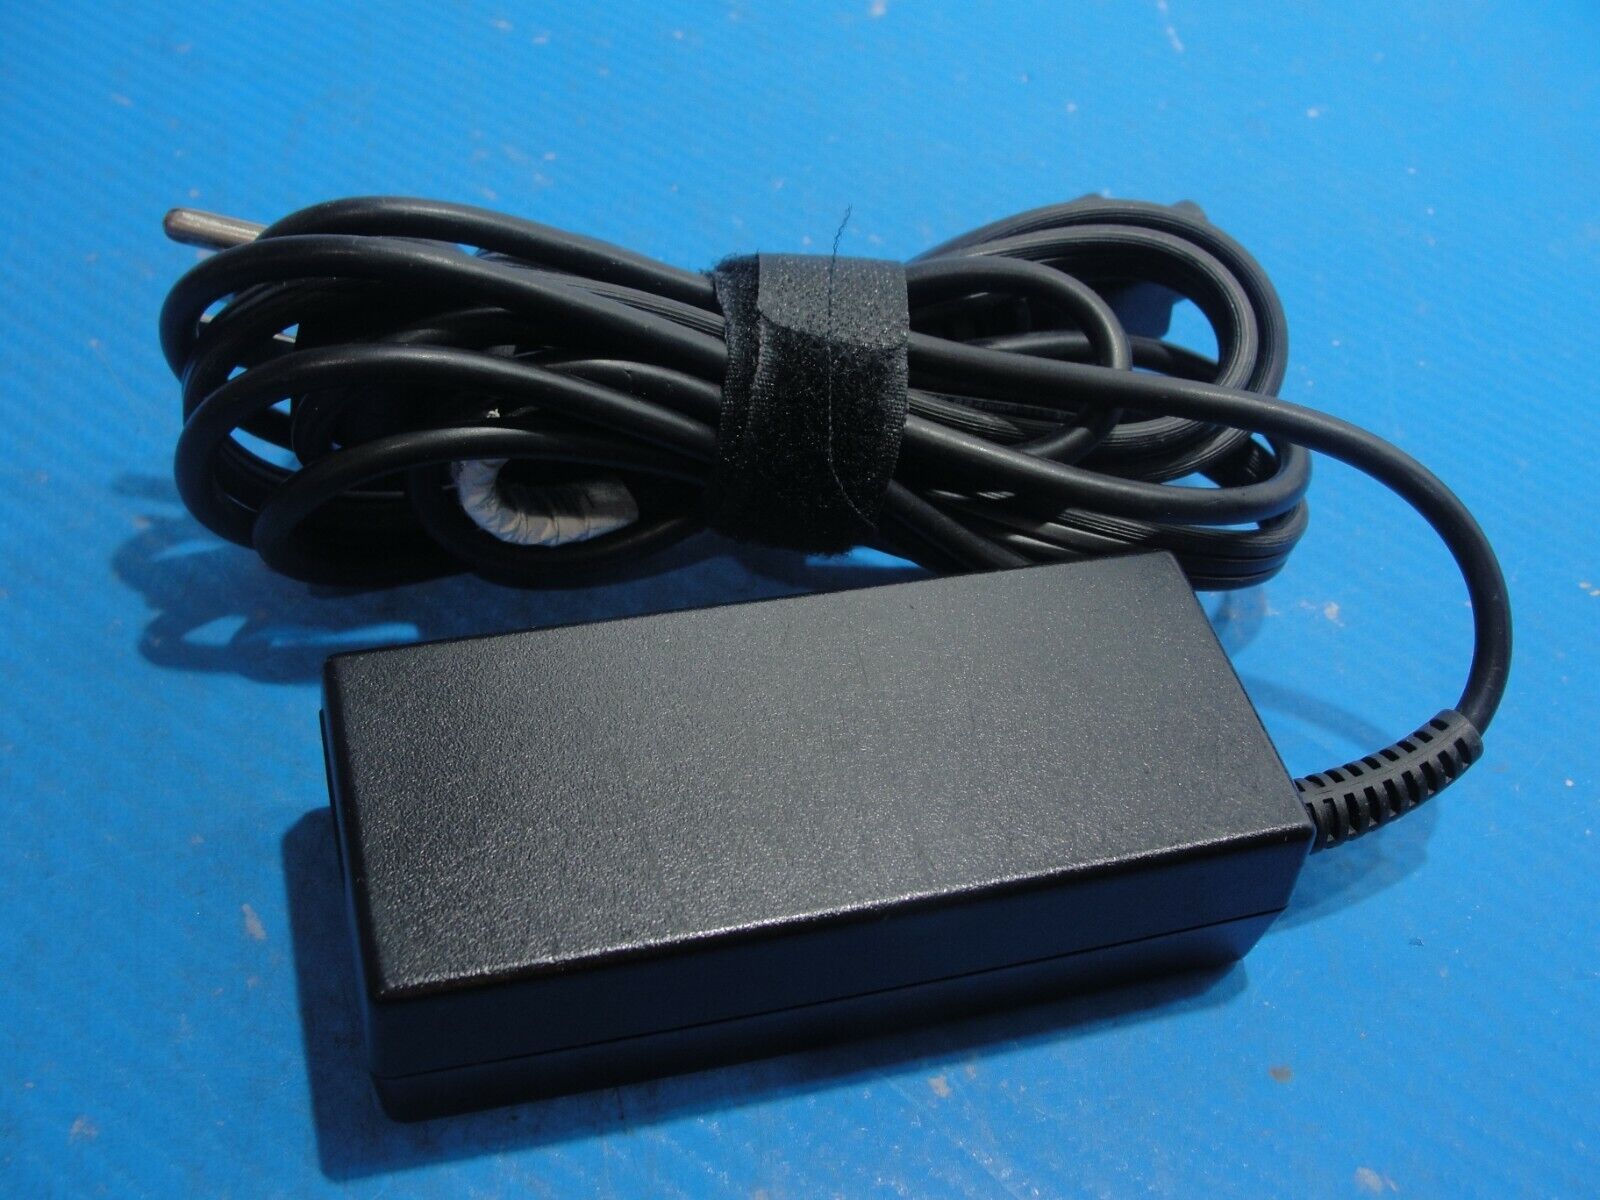 Genuine HP AC Adapter Power Charger 19.5V 3.33A 65W 710412-001 Blue Tip